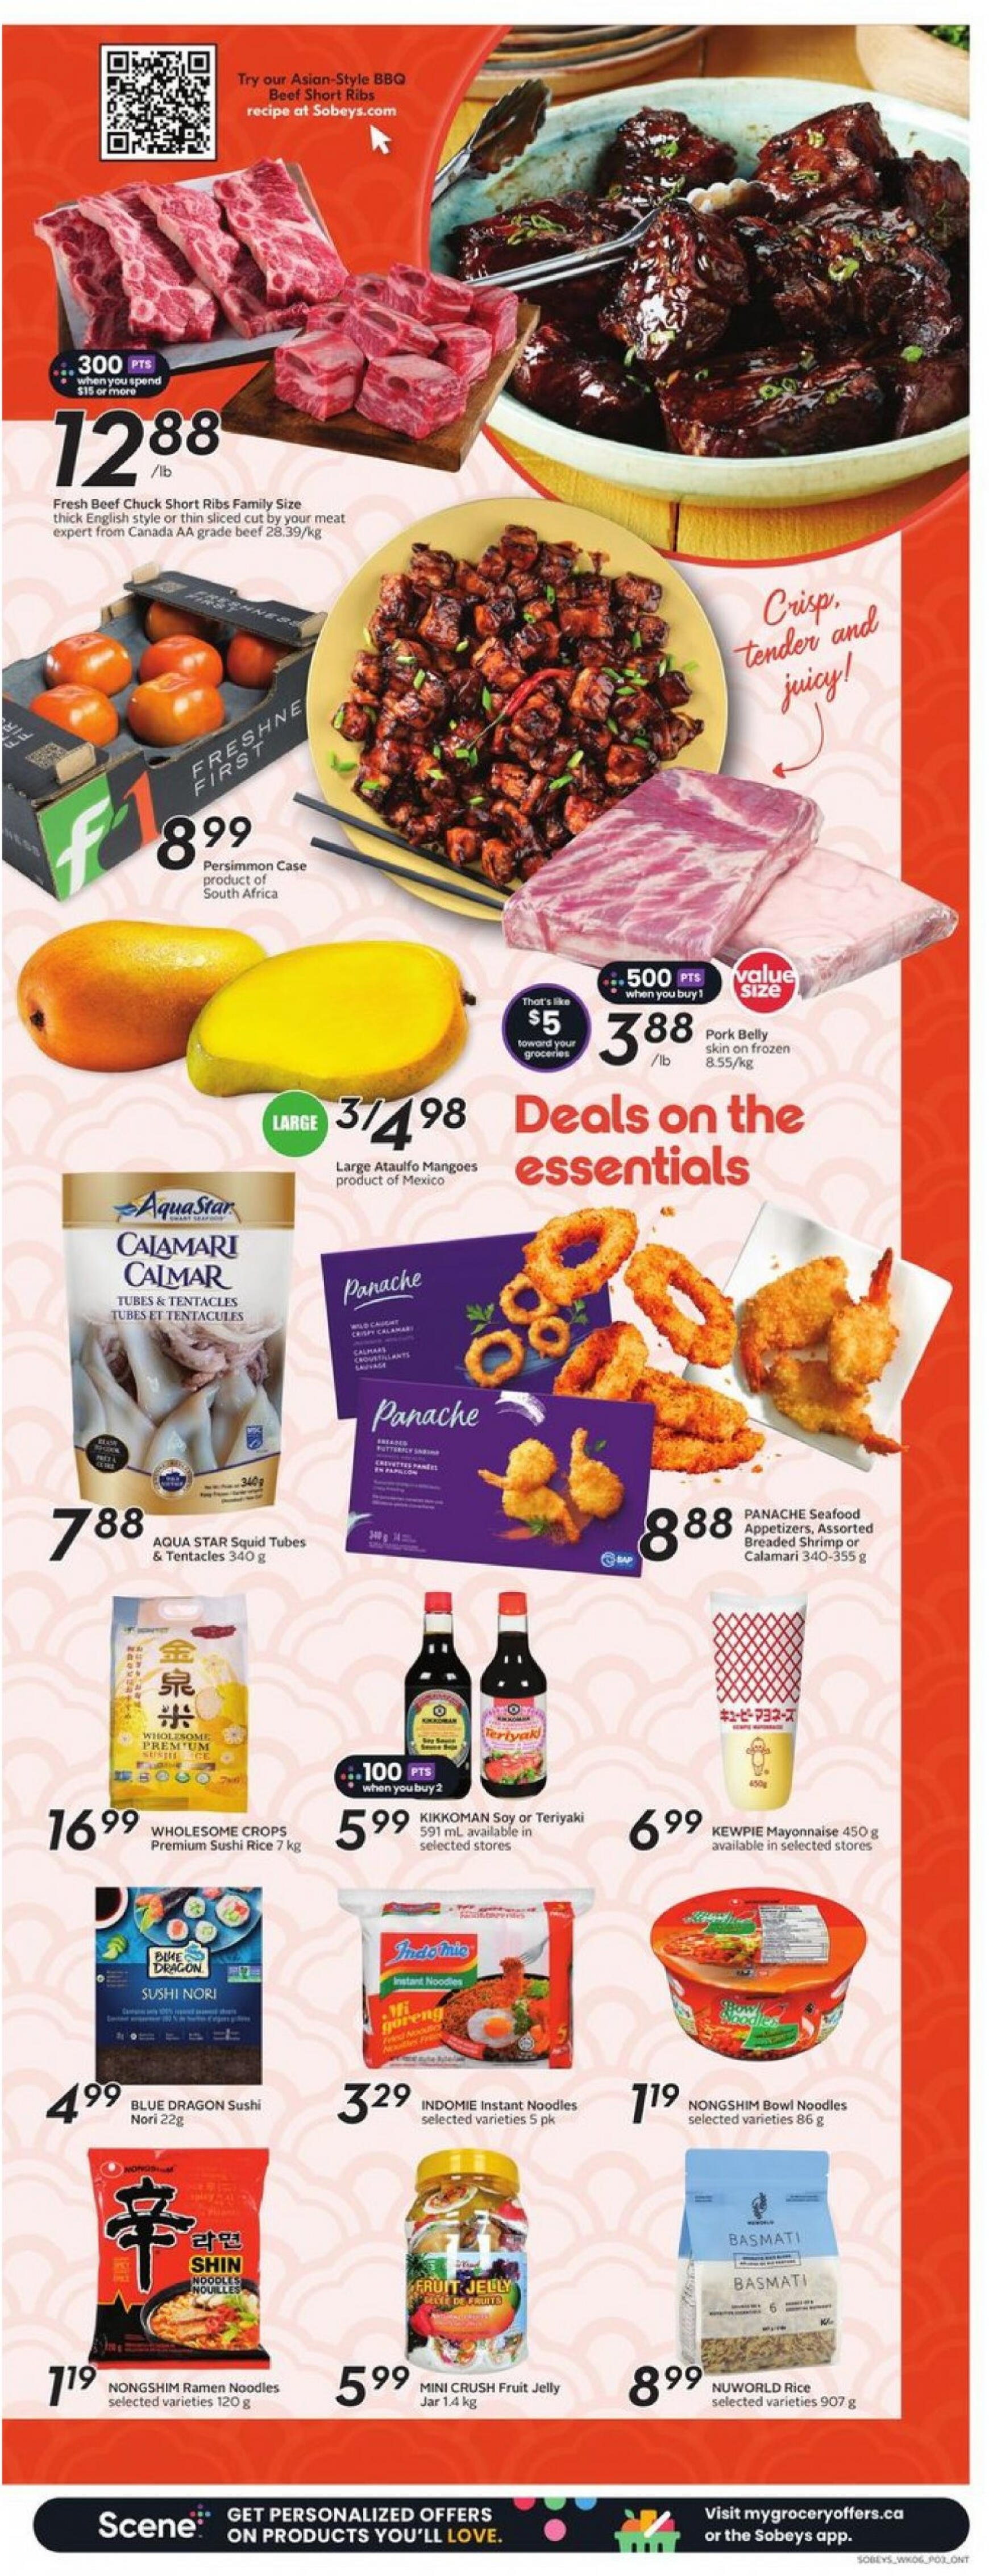 sobeys - Sobeys - Weekly Flyer - Ontario flyer current 06.06. - 12.06. - page: 7